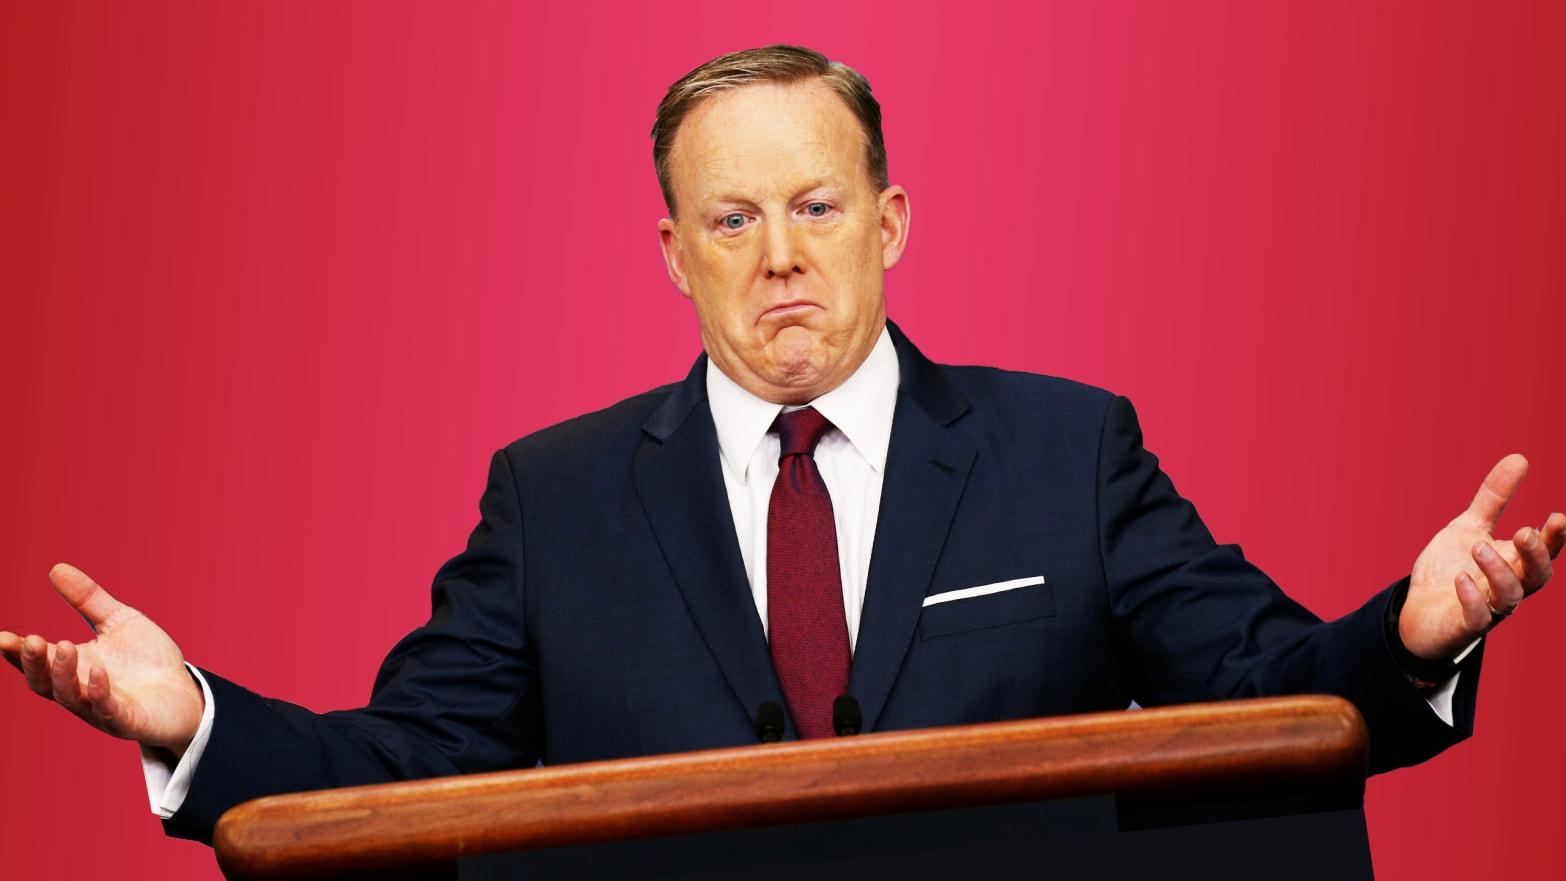 No longer in the White House, Sean Spicer is struggling with the stain of his tenure.